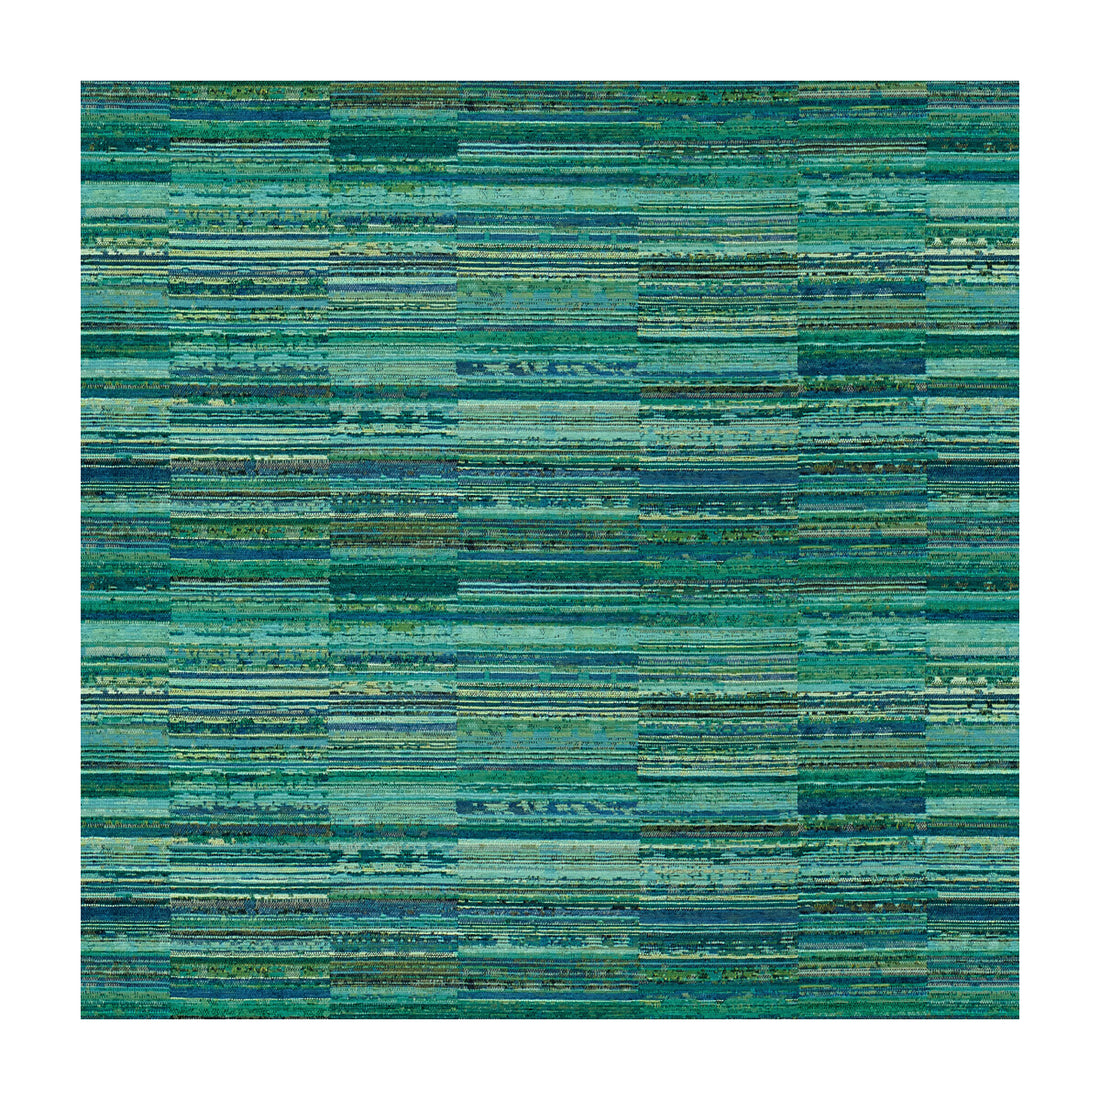 Rafiki fabric in ocean color - pattern 33867.5.0 - by Kravet Contract in the Tanzania J Banks collection